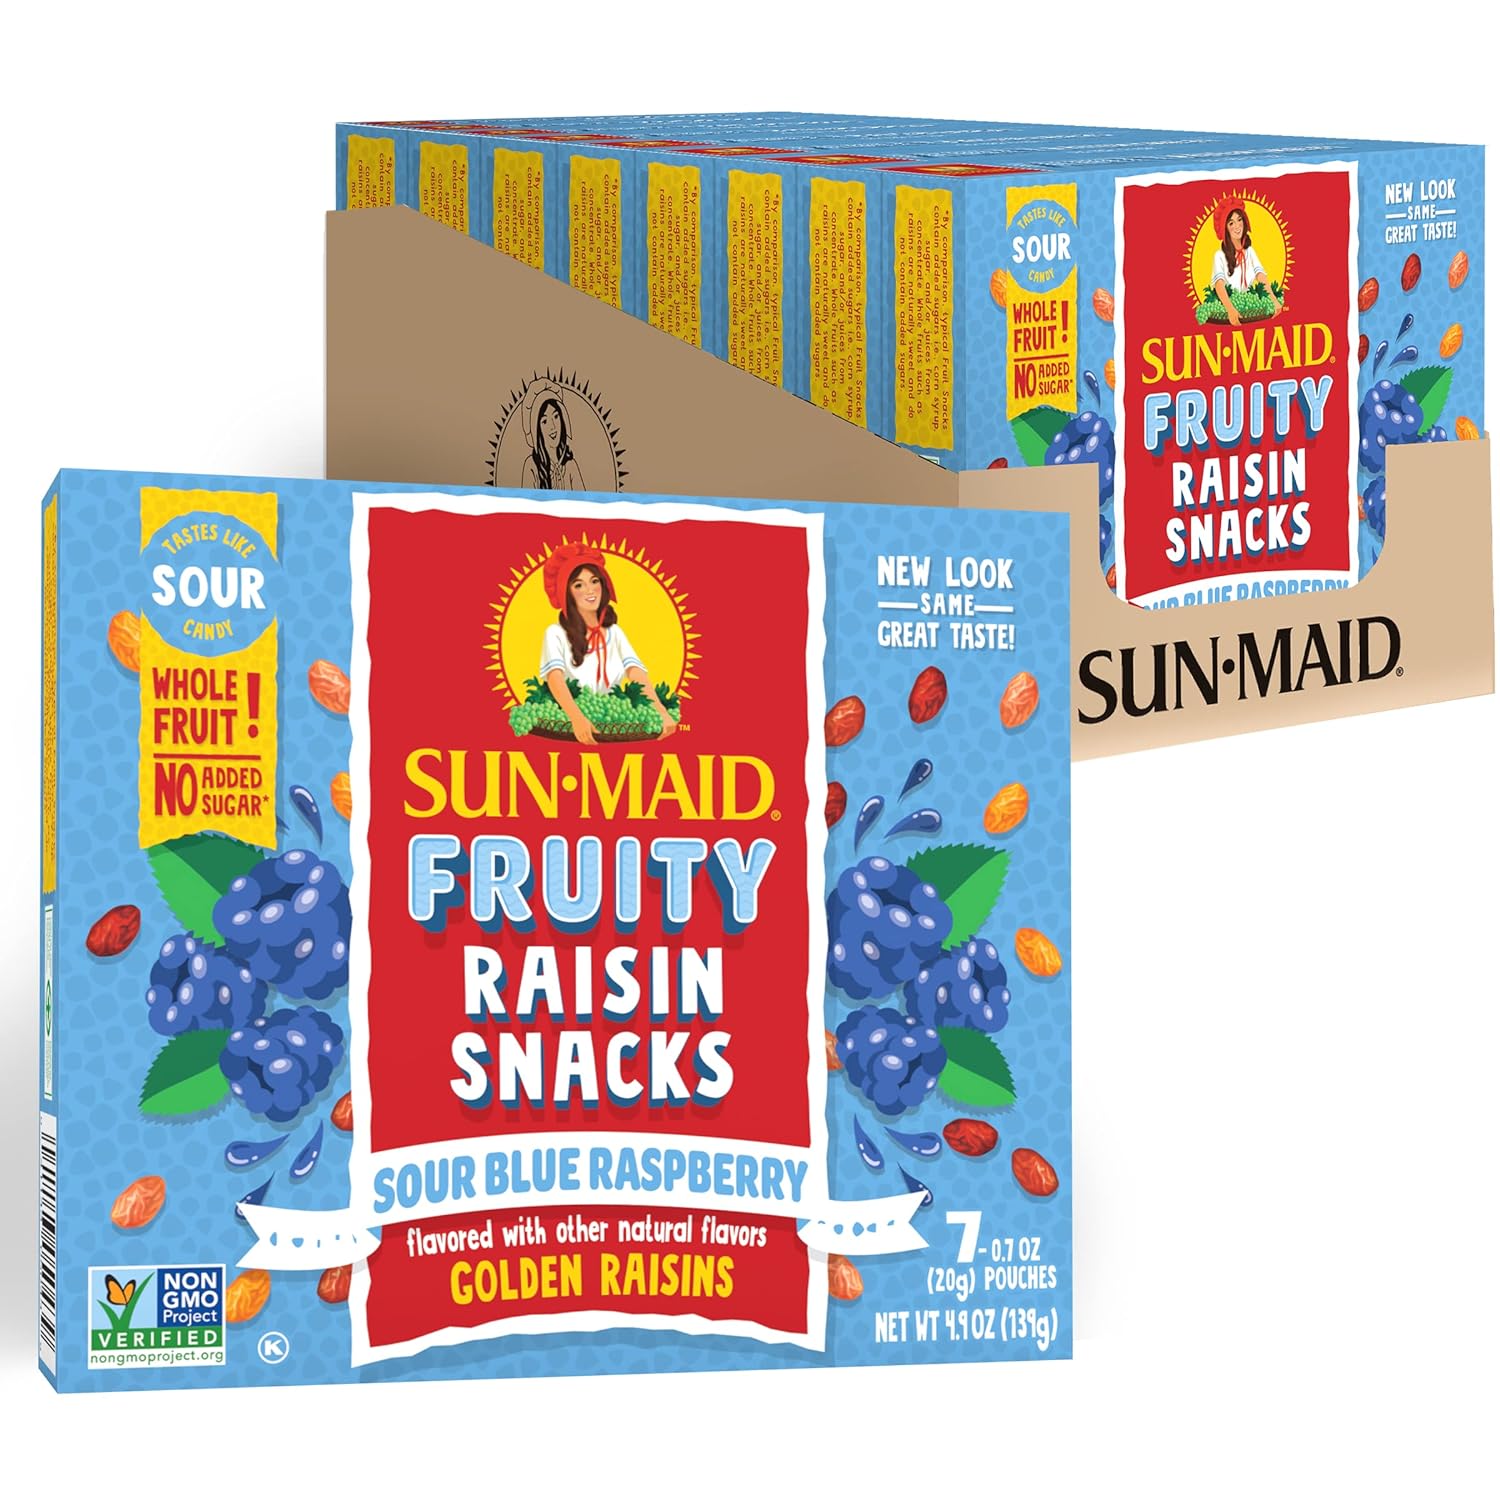 Sun-Maid Sour Blue Raspberry Fruity Raisin Snacks - (56 Pack) 0.7 oz Pouches - Sour Blue Raspberry Raisins - Dried Fruit Snack for Lunches and Snacks